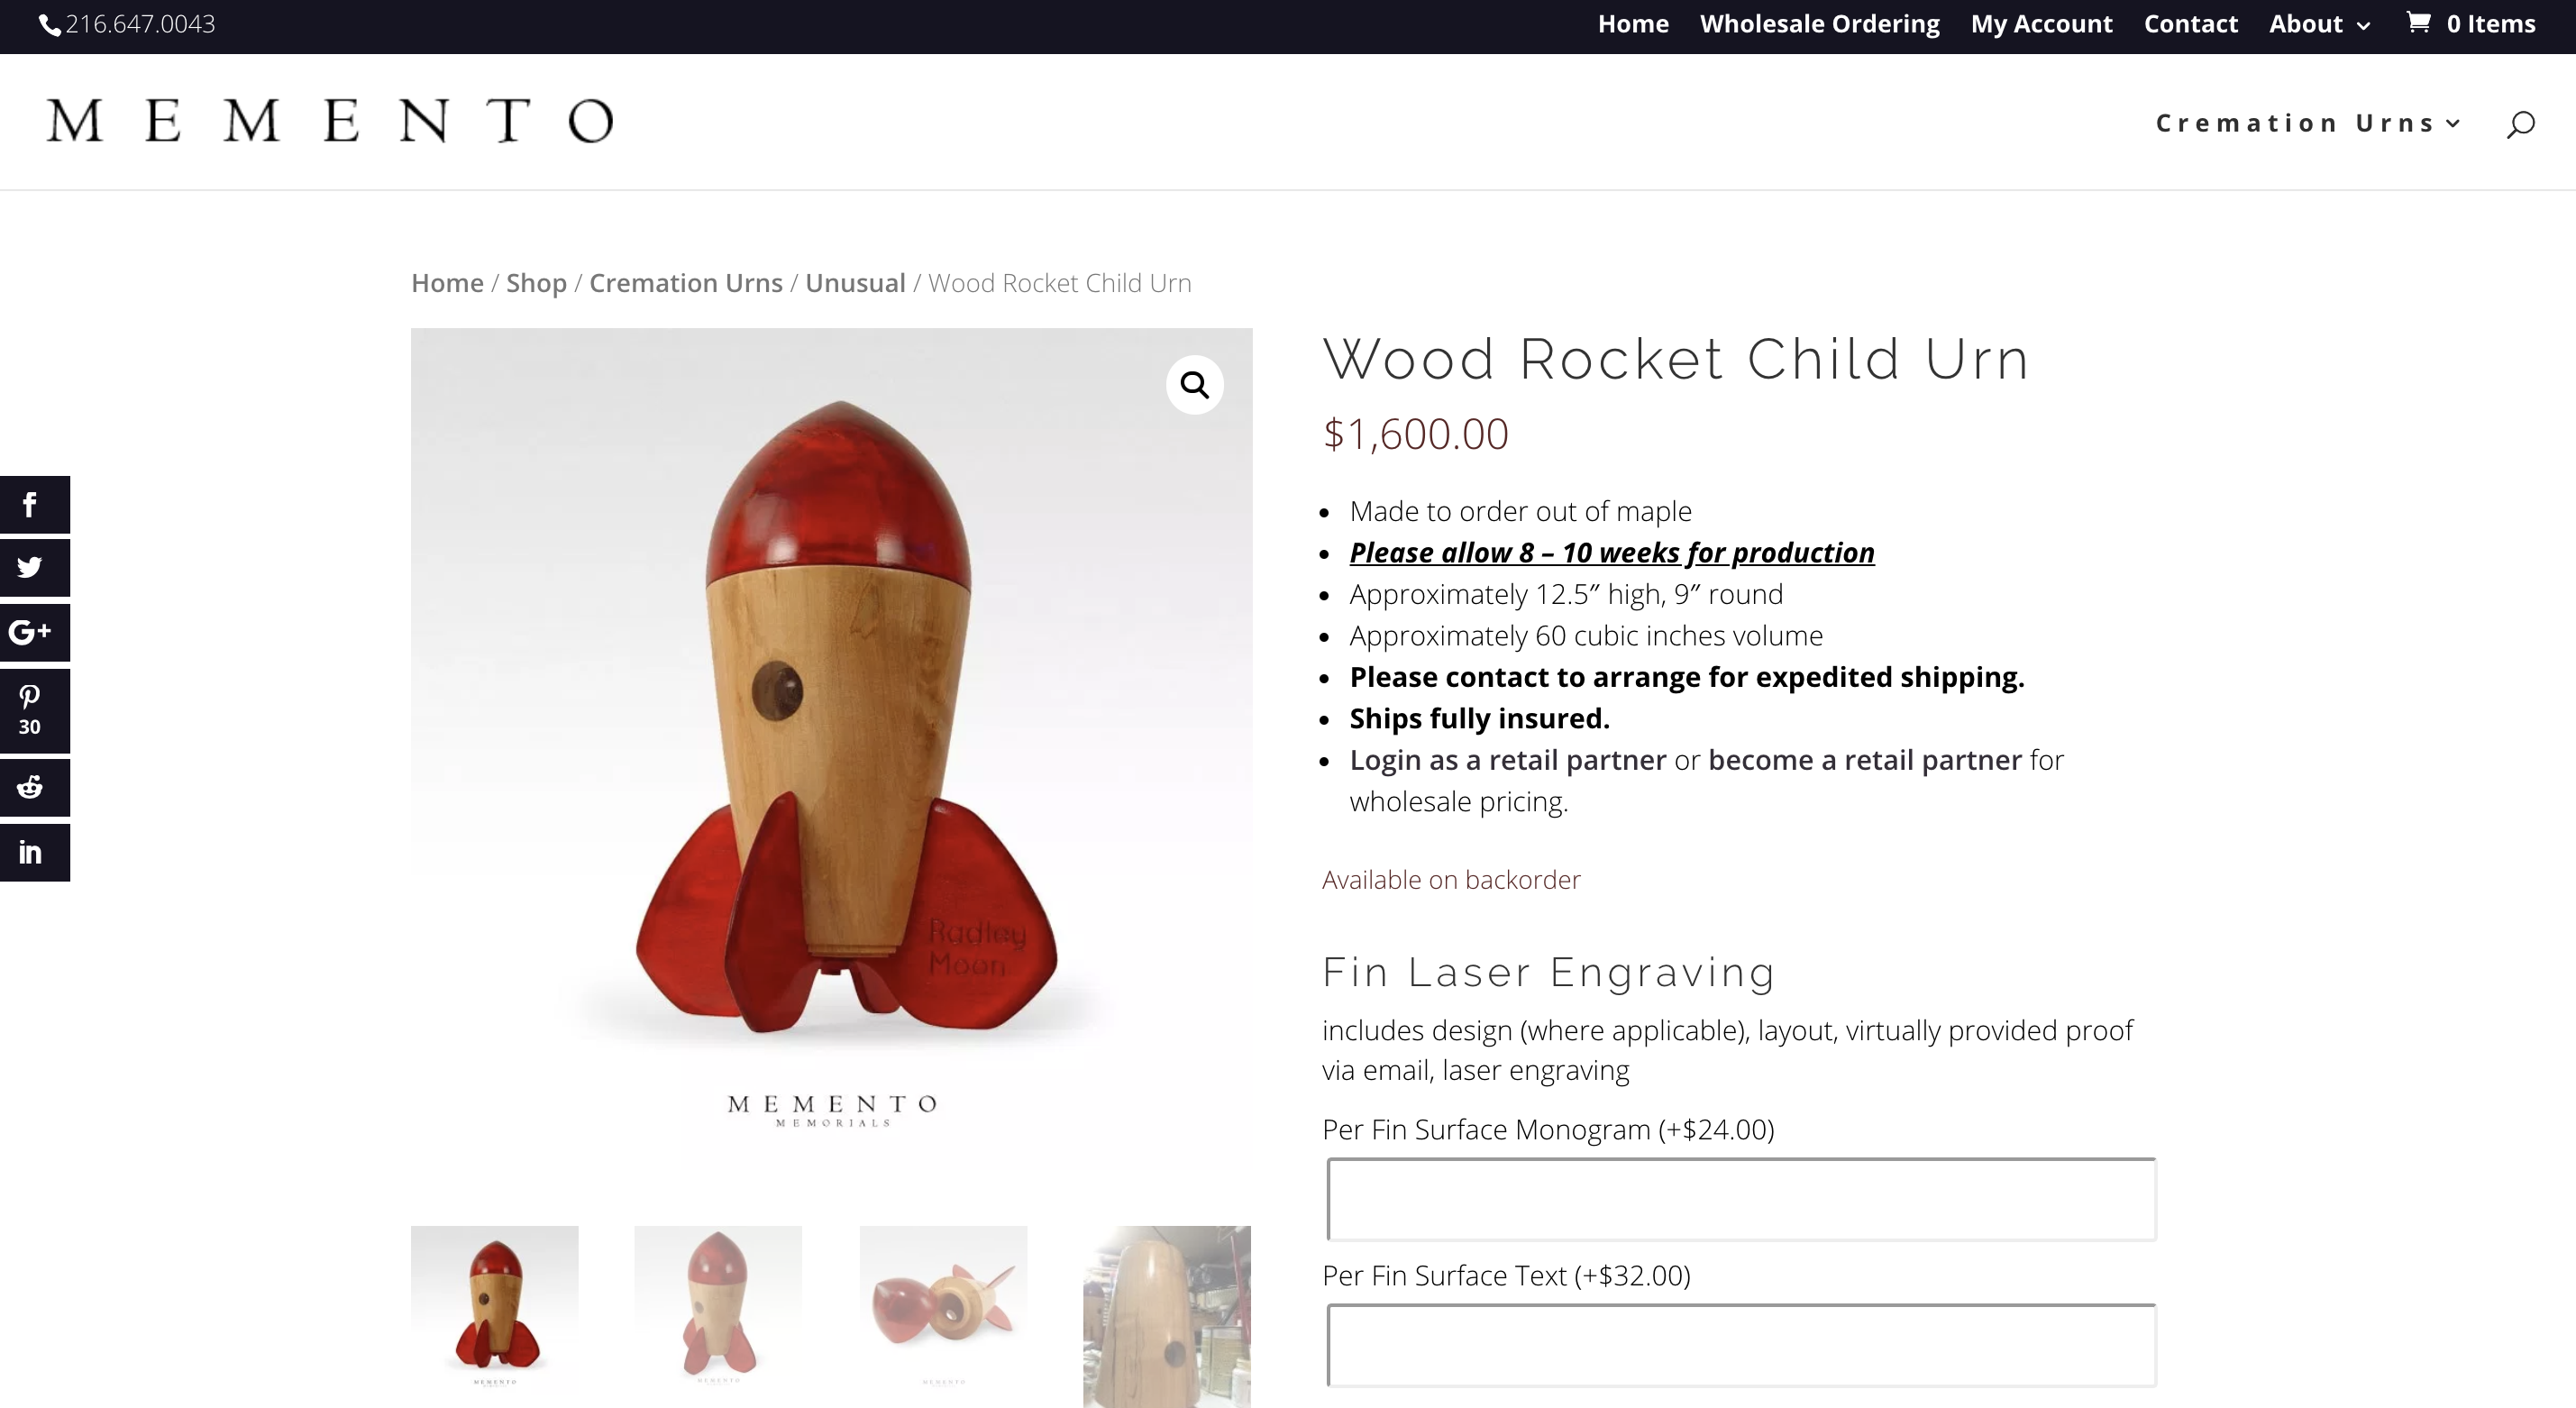 Rocket-shaped urn made from wood for a child.